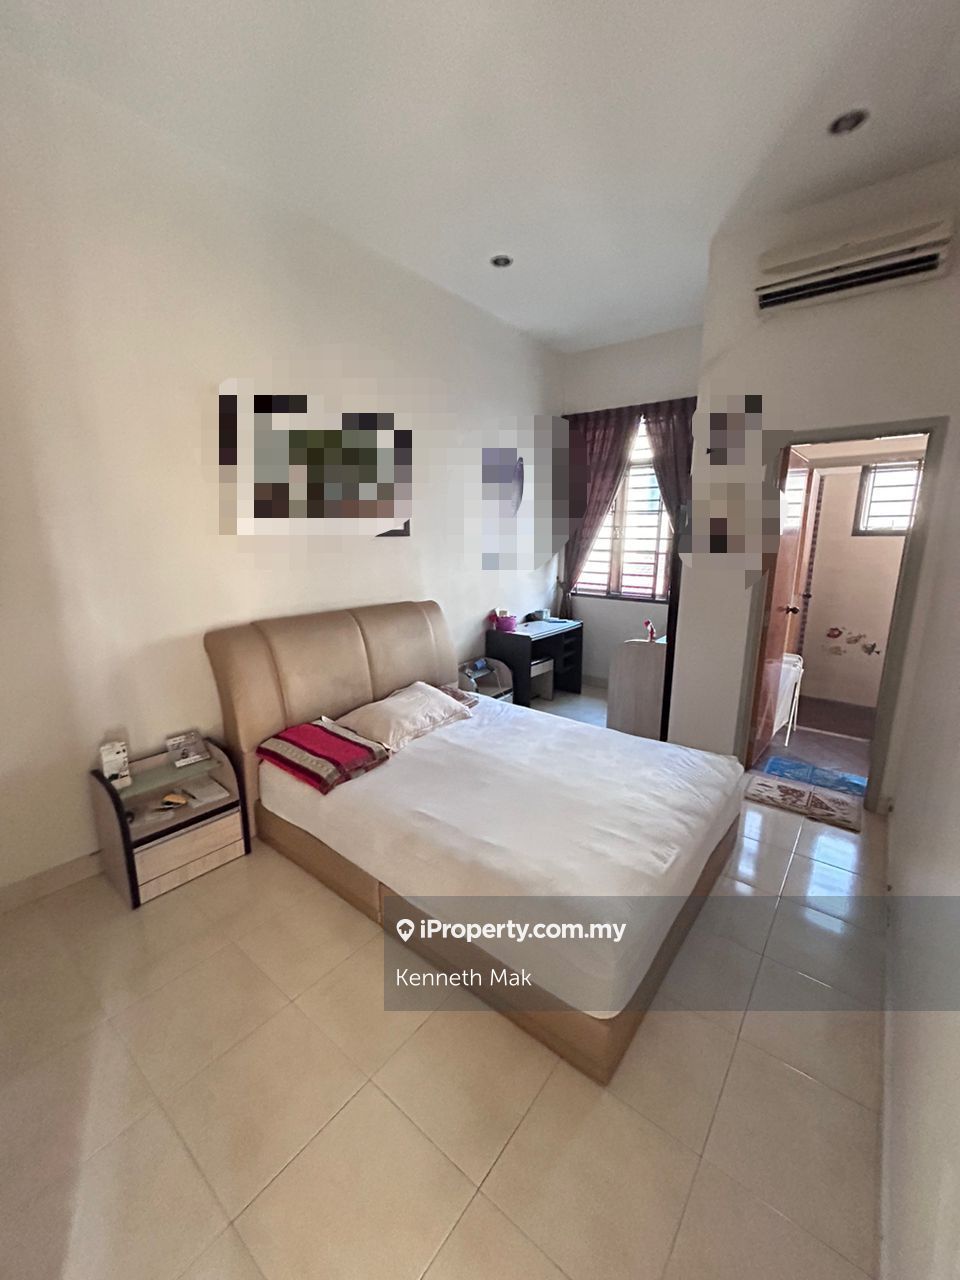 Taman Desa Cemerlang, Double Storey, Corner, Fully Furnished, Autogate